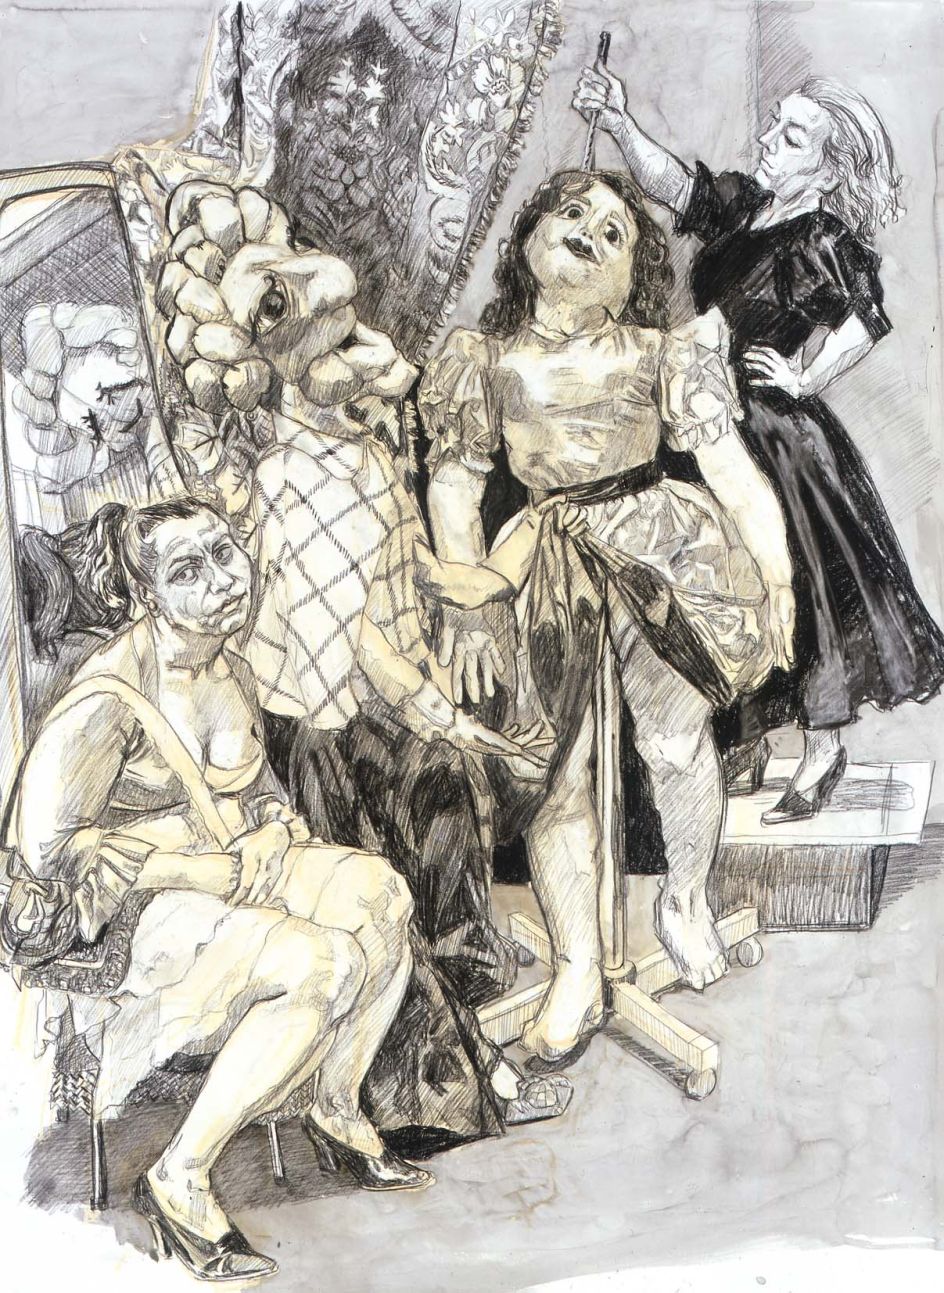 Paula REGO (b. 1935) Impailed, 2008 Conté pencil and ink wash on paper, 137 x 102 cm Collection: Private Collection © Paula Rego, courtesy of Marlborough, New York and London